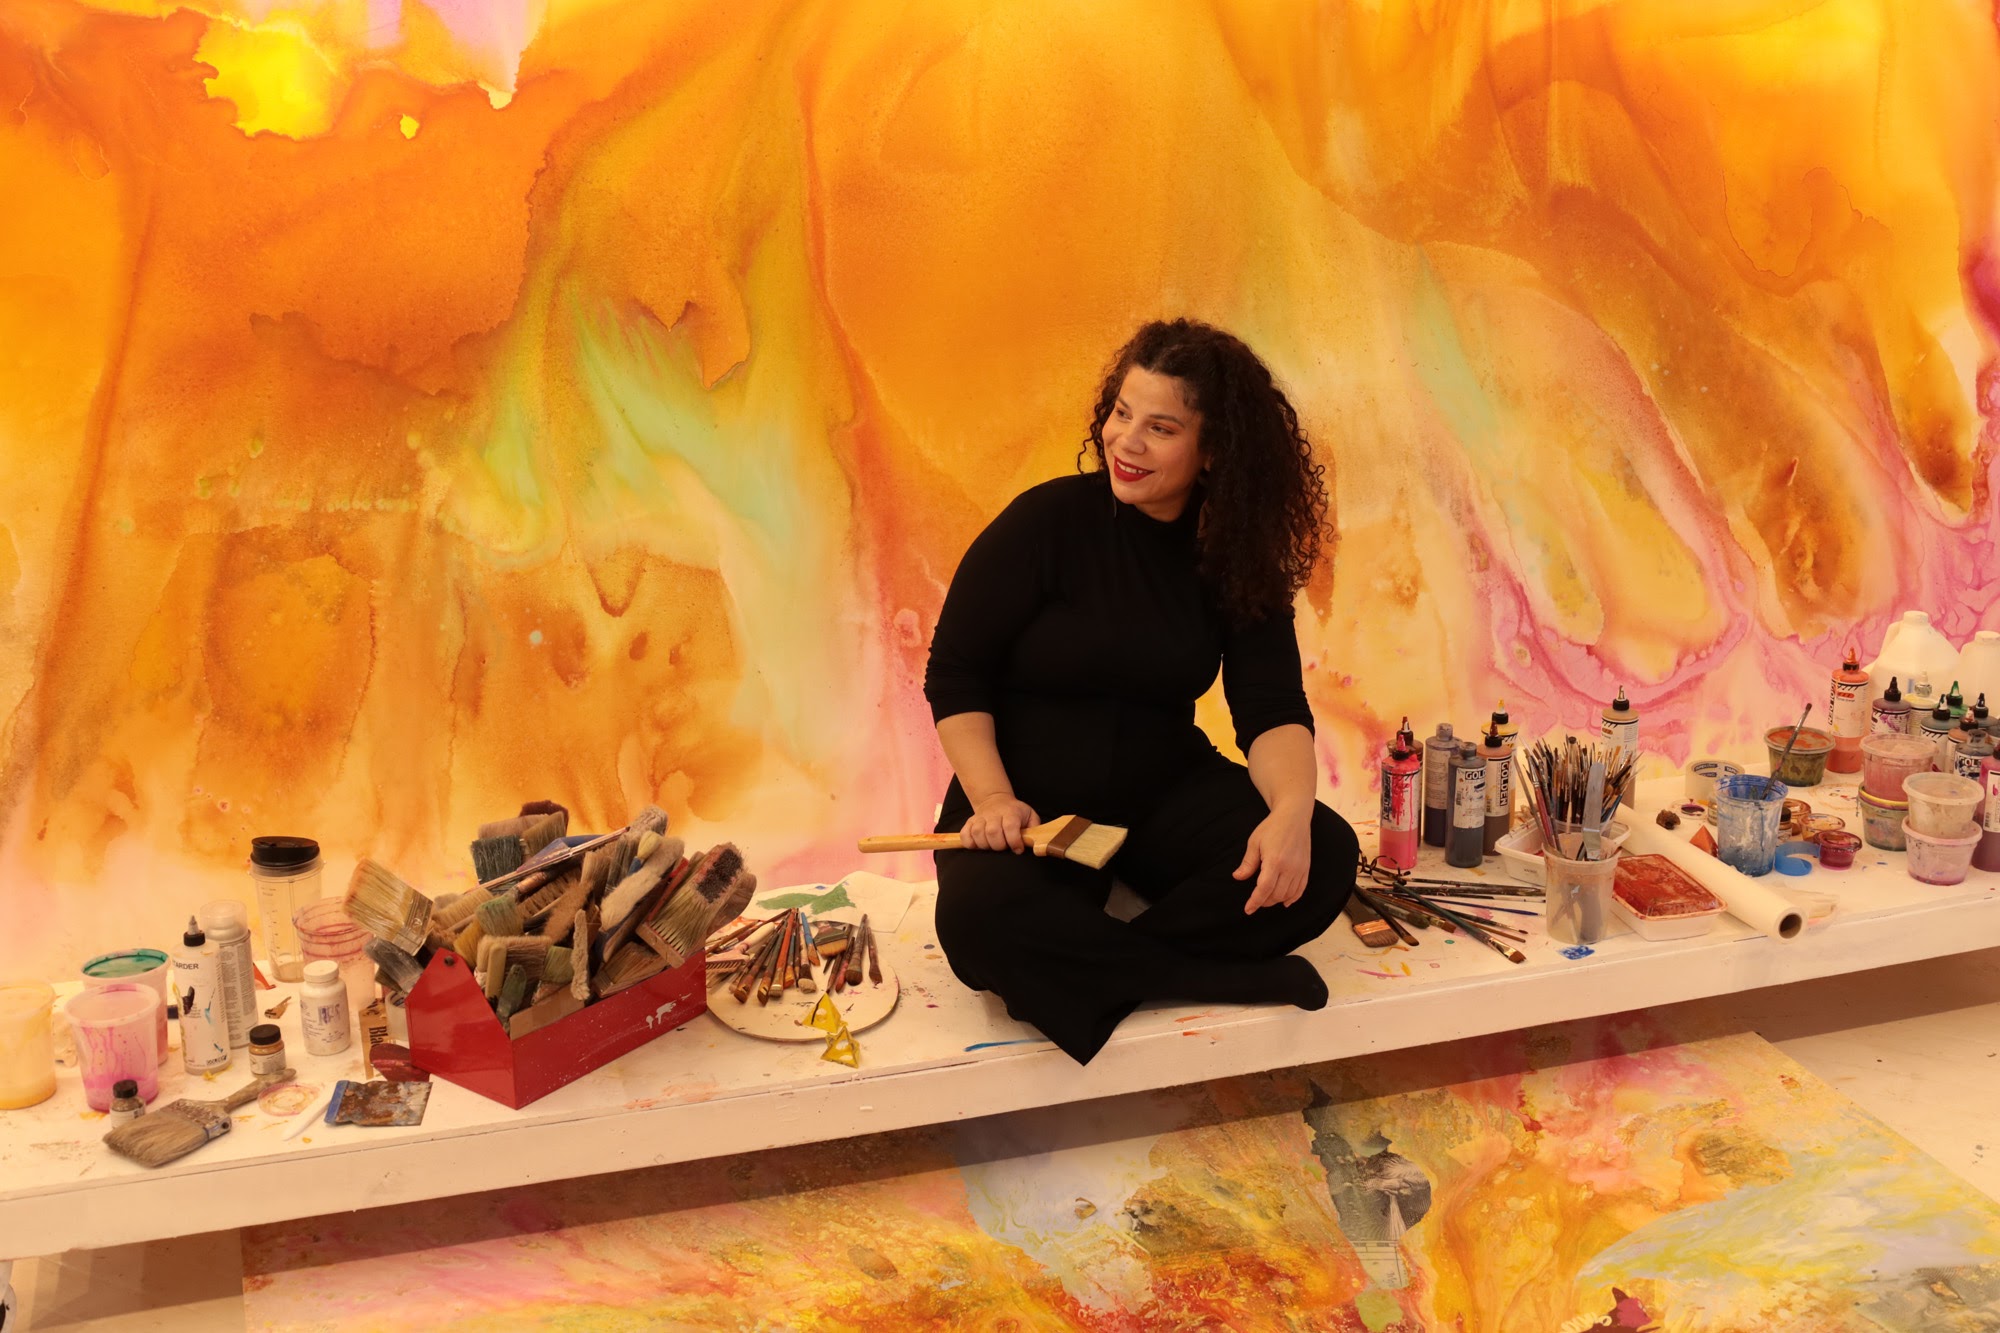 An artist with shoulder-length curly hair sitting in the studio painting a large orange painting